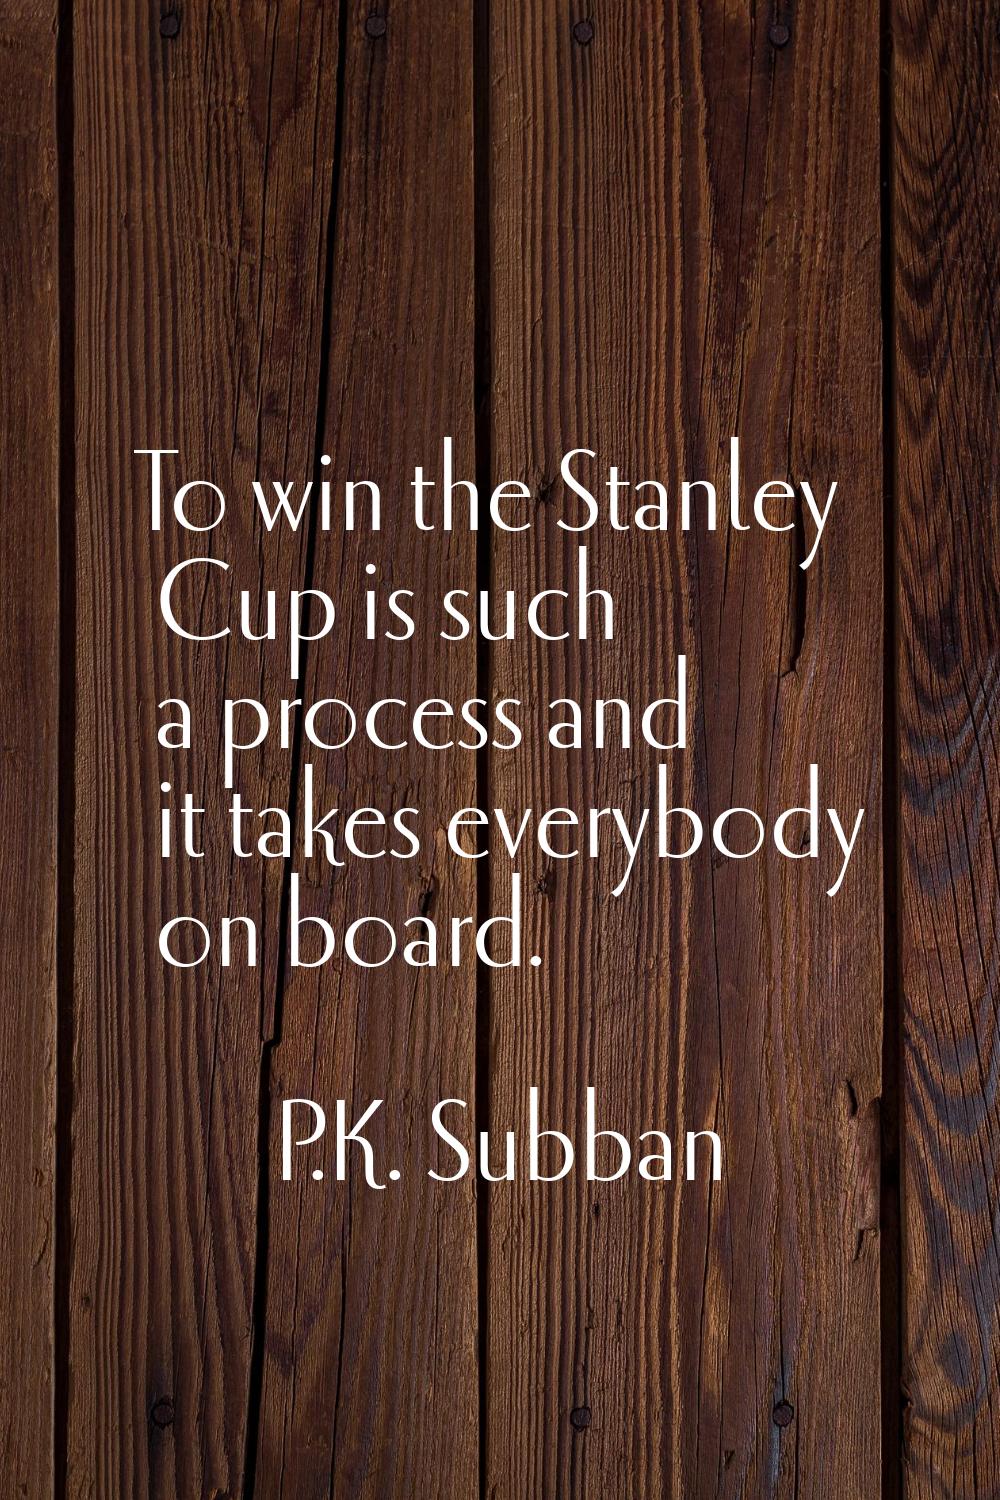 To win the Stanley Cup is such a process and it takes everybody on board.